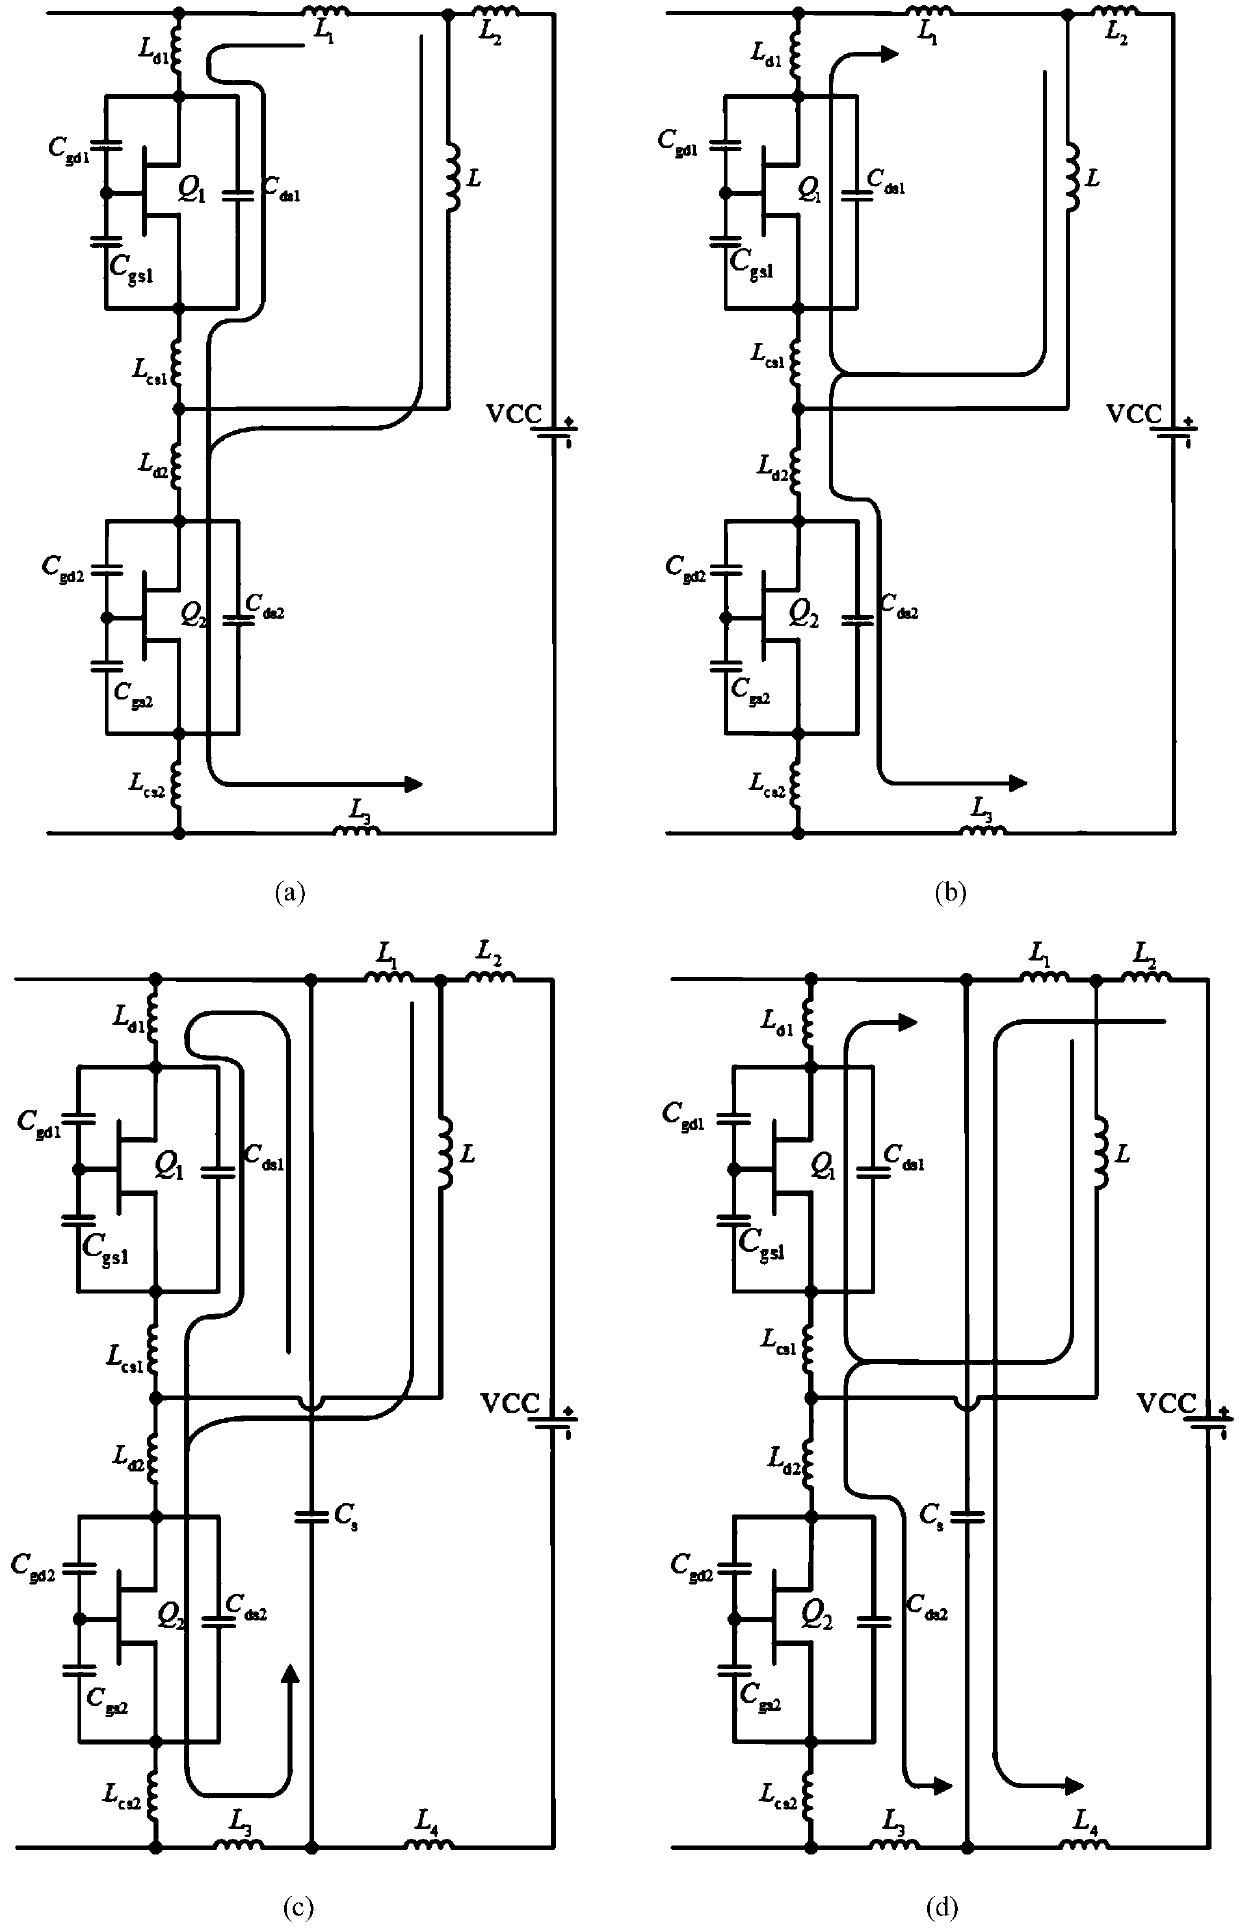 Lossless buffer circuit for suppressing GaN half-bridge module voltage spike and current resonance and test circuit thereof